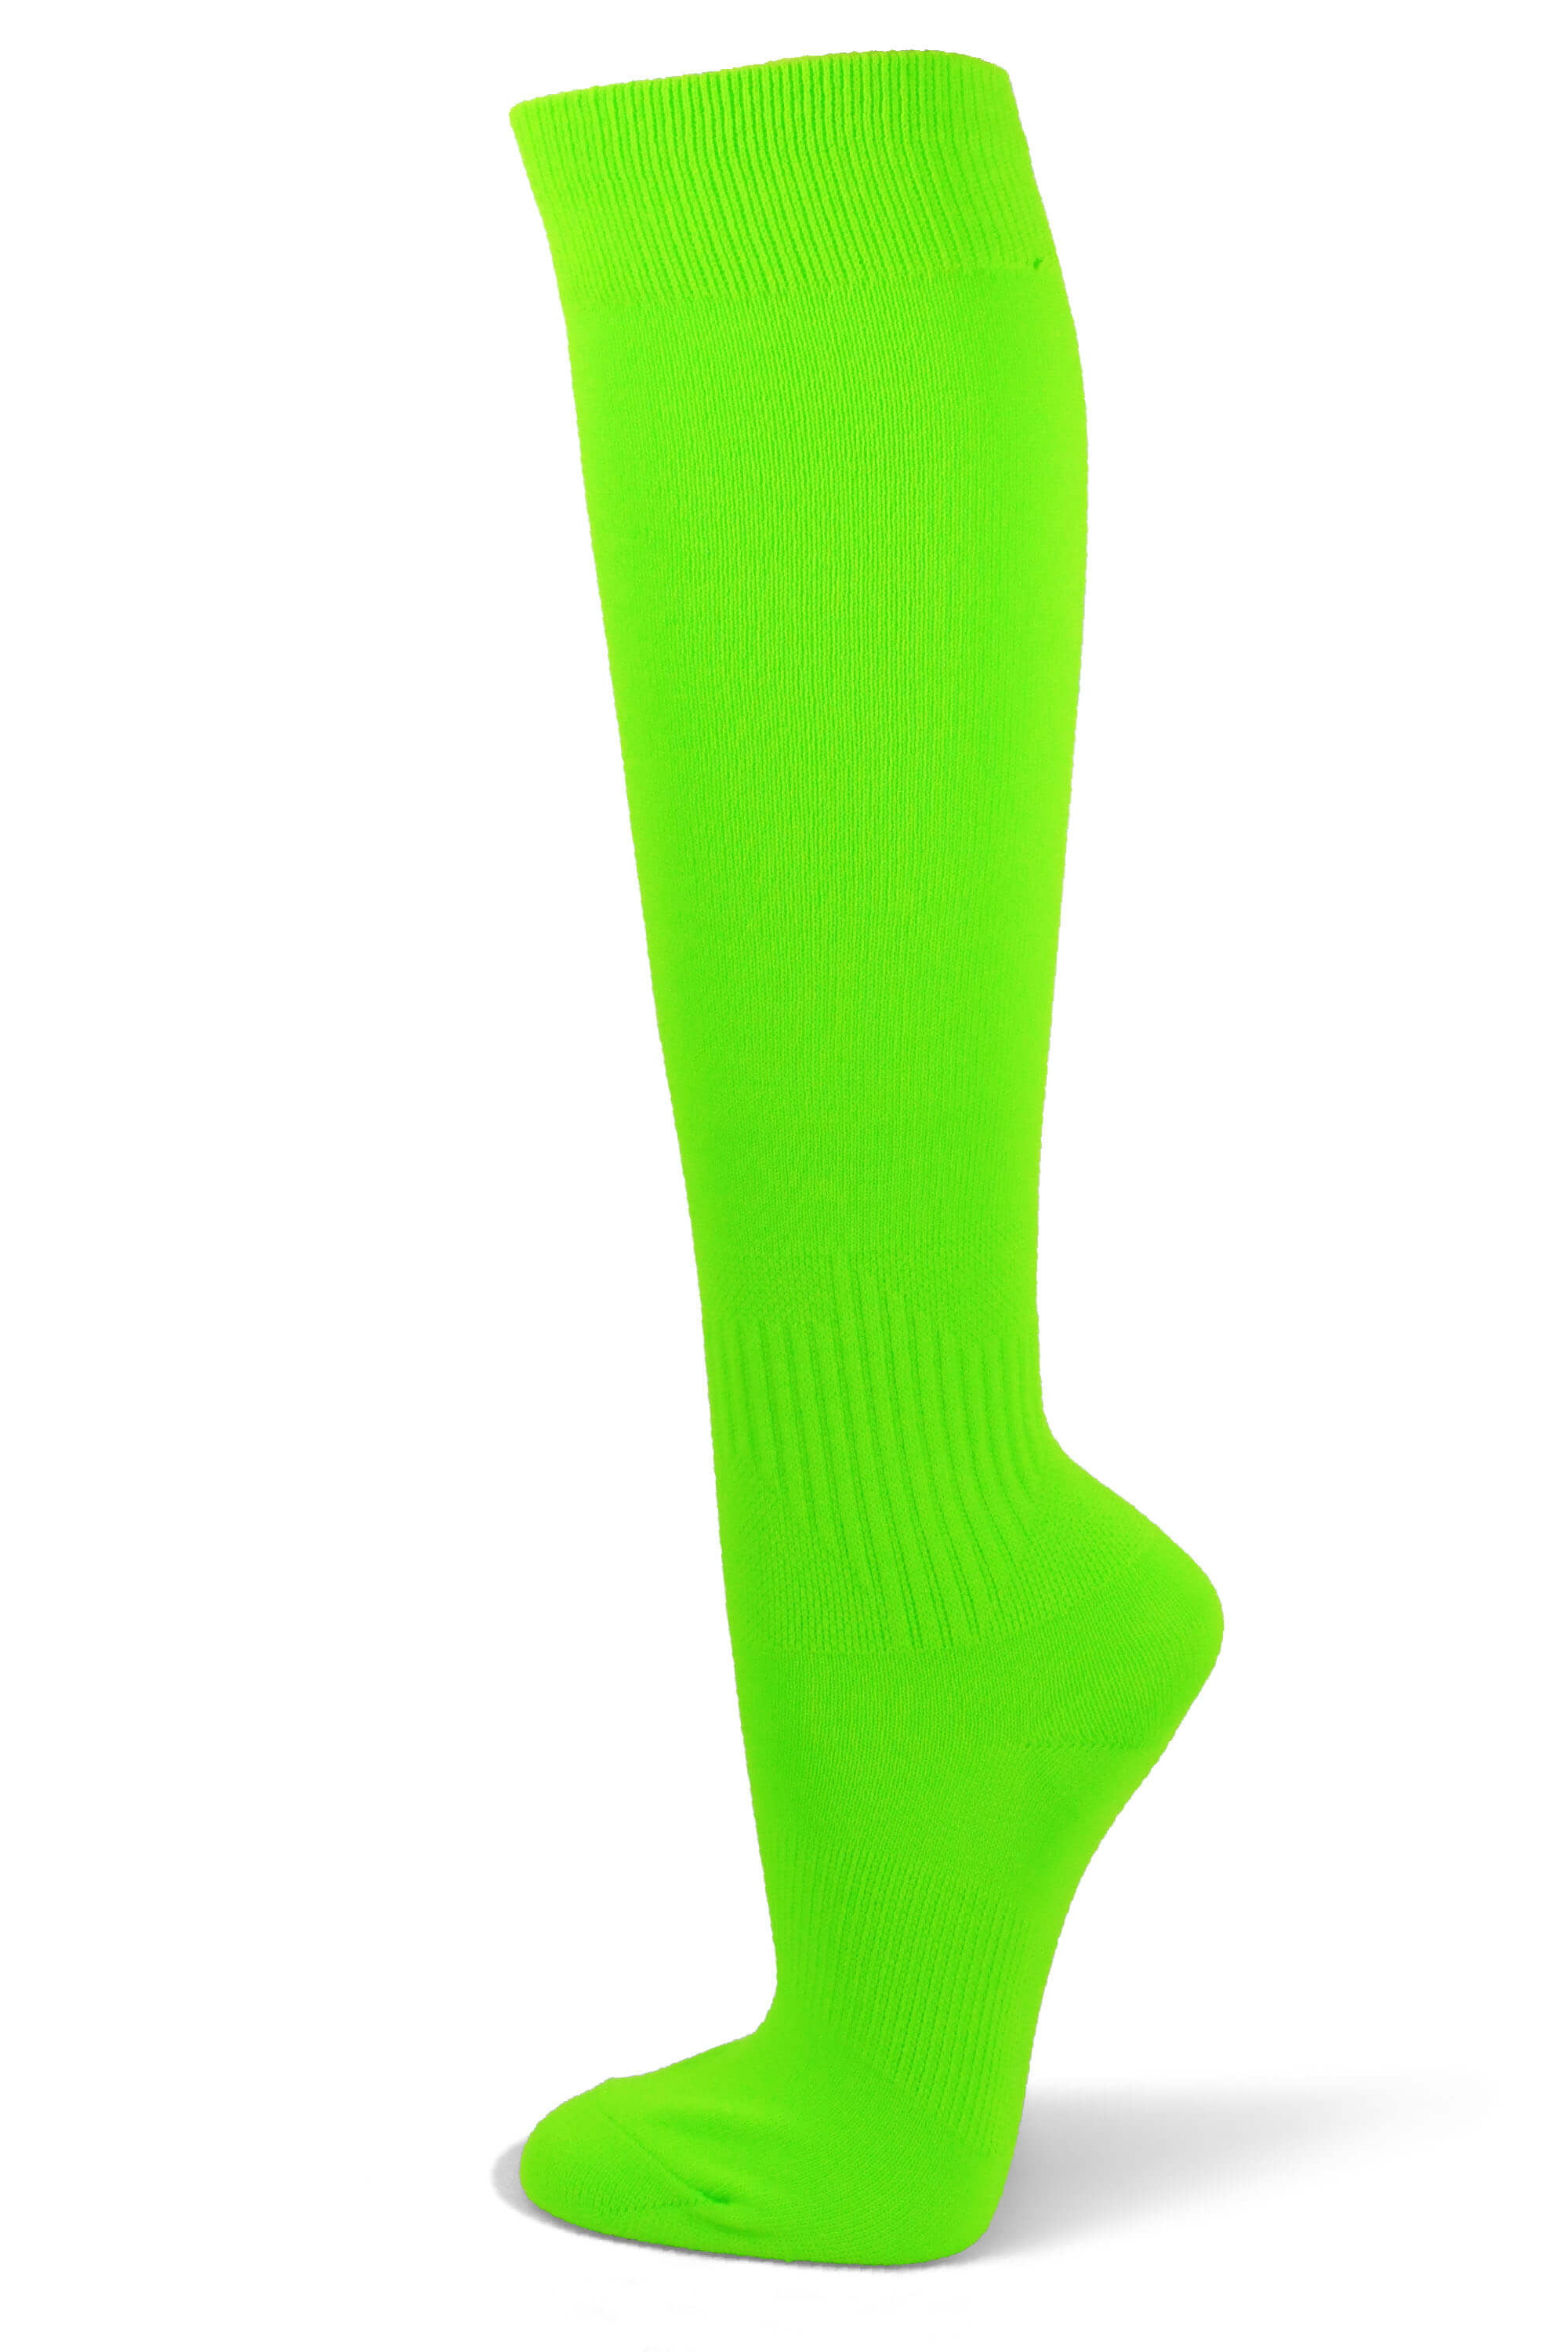 Couver Unisex Polyester Soccer Knee High Sports Athletic Socks, Neon ...